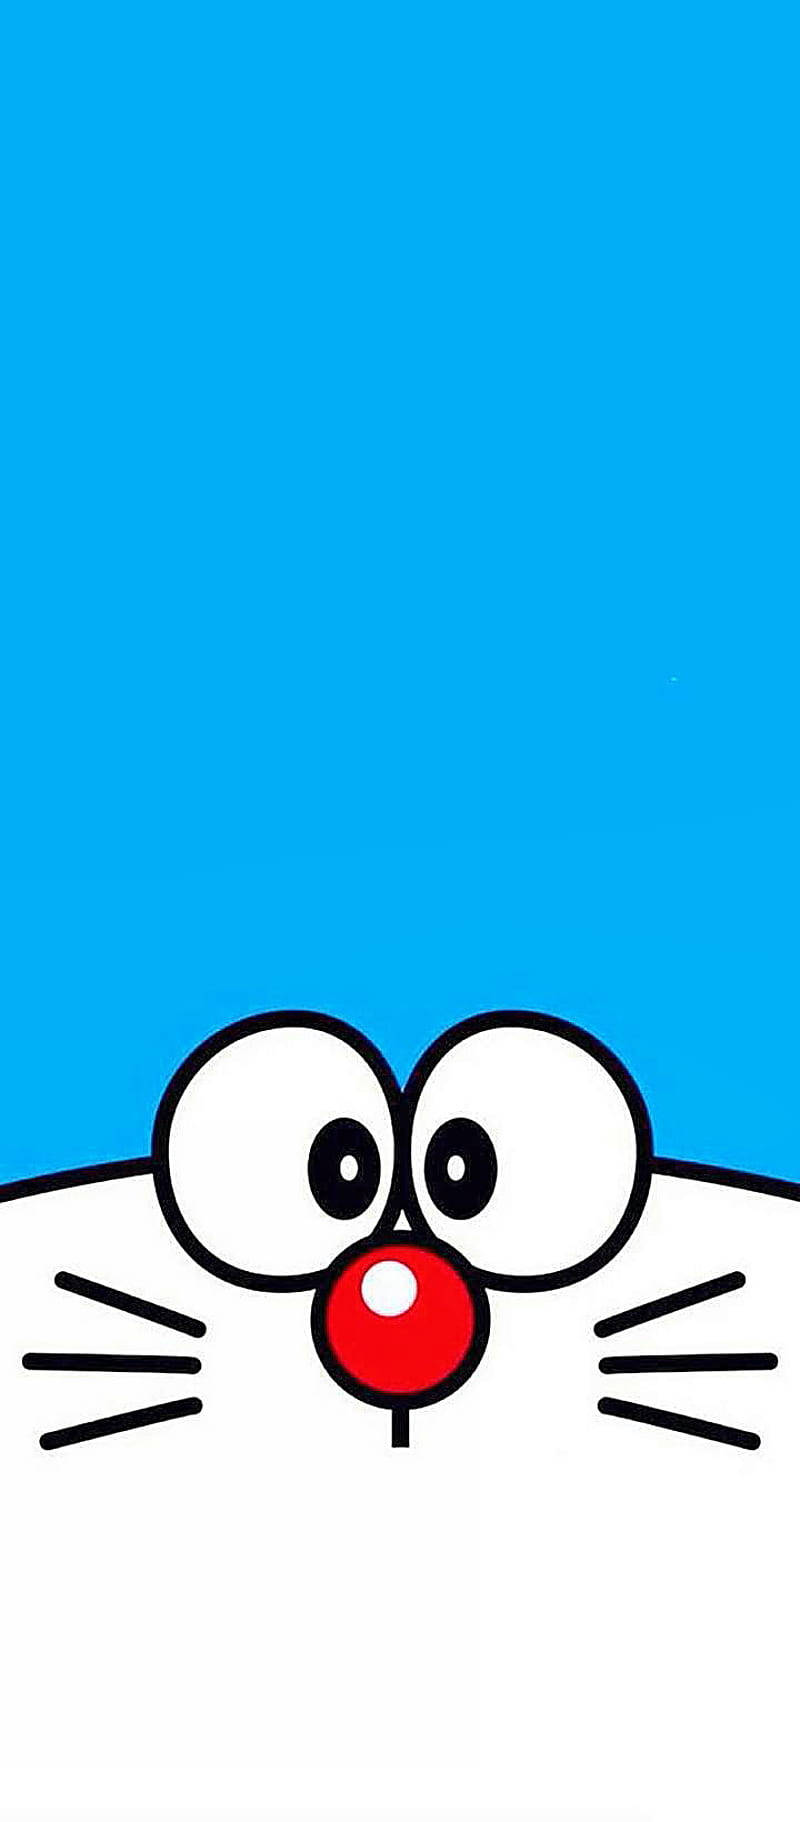 Top 999+ Doraemon Iphone Wallpapers Full HD, 4K✅Free to Use